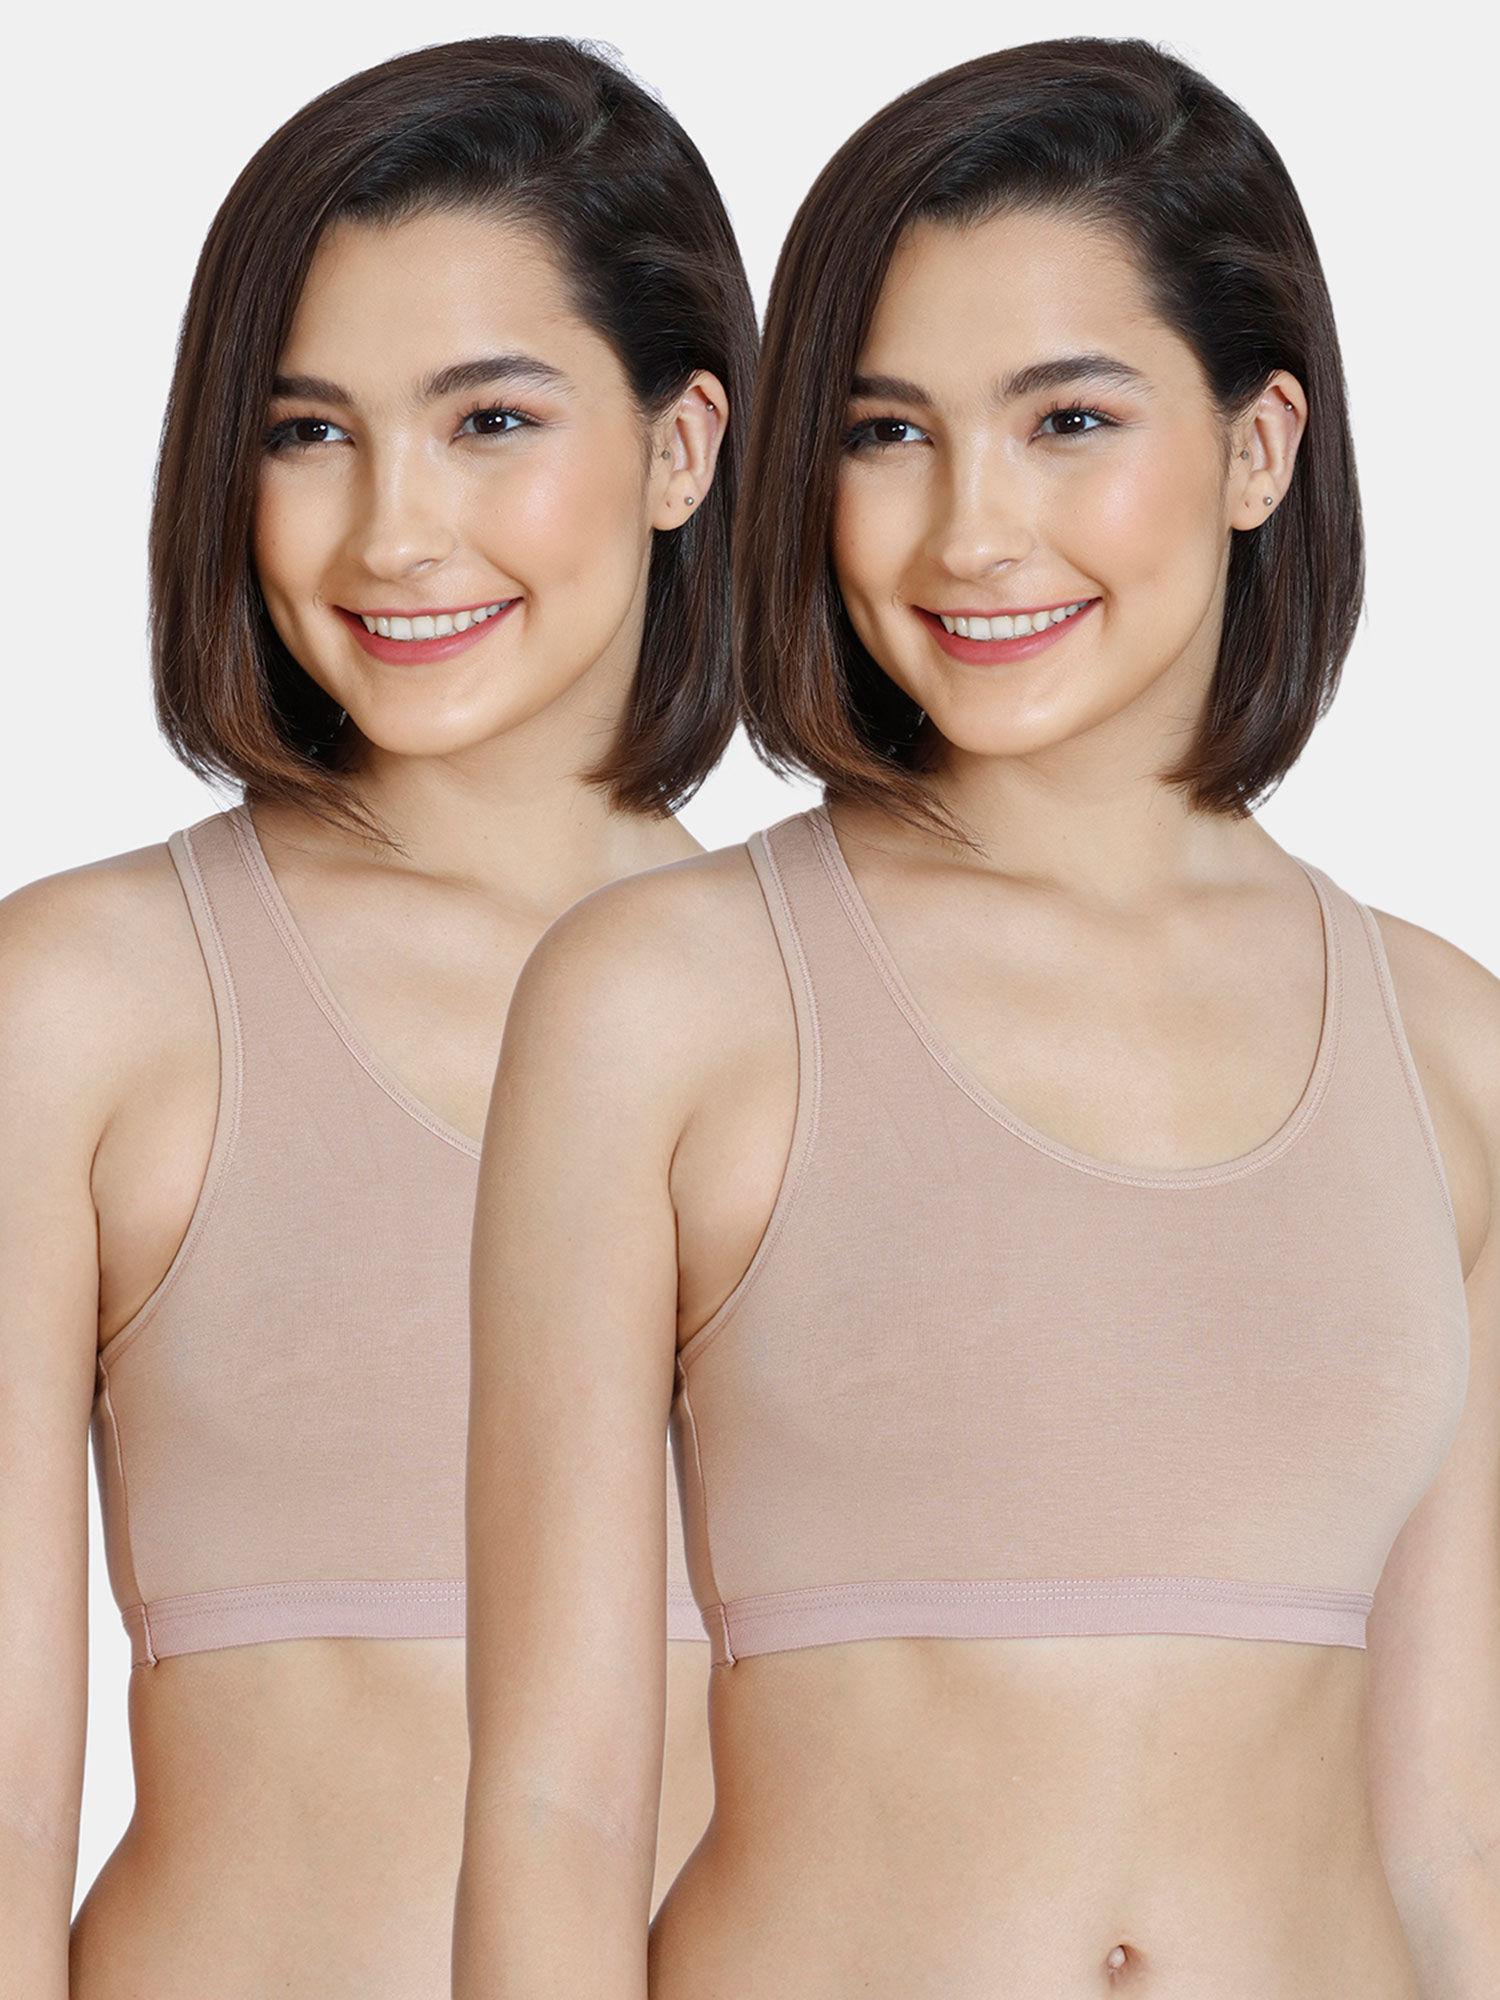 girls-double-layered-non-wired-sports-bra-roebuck-beige-(pack-of-2)